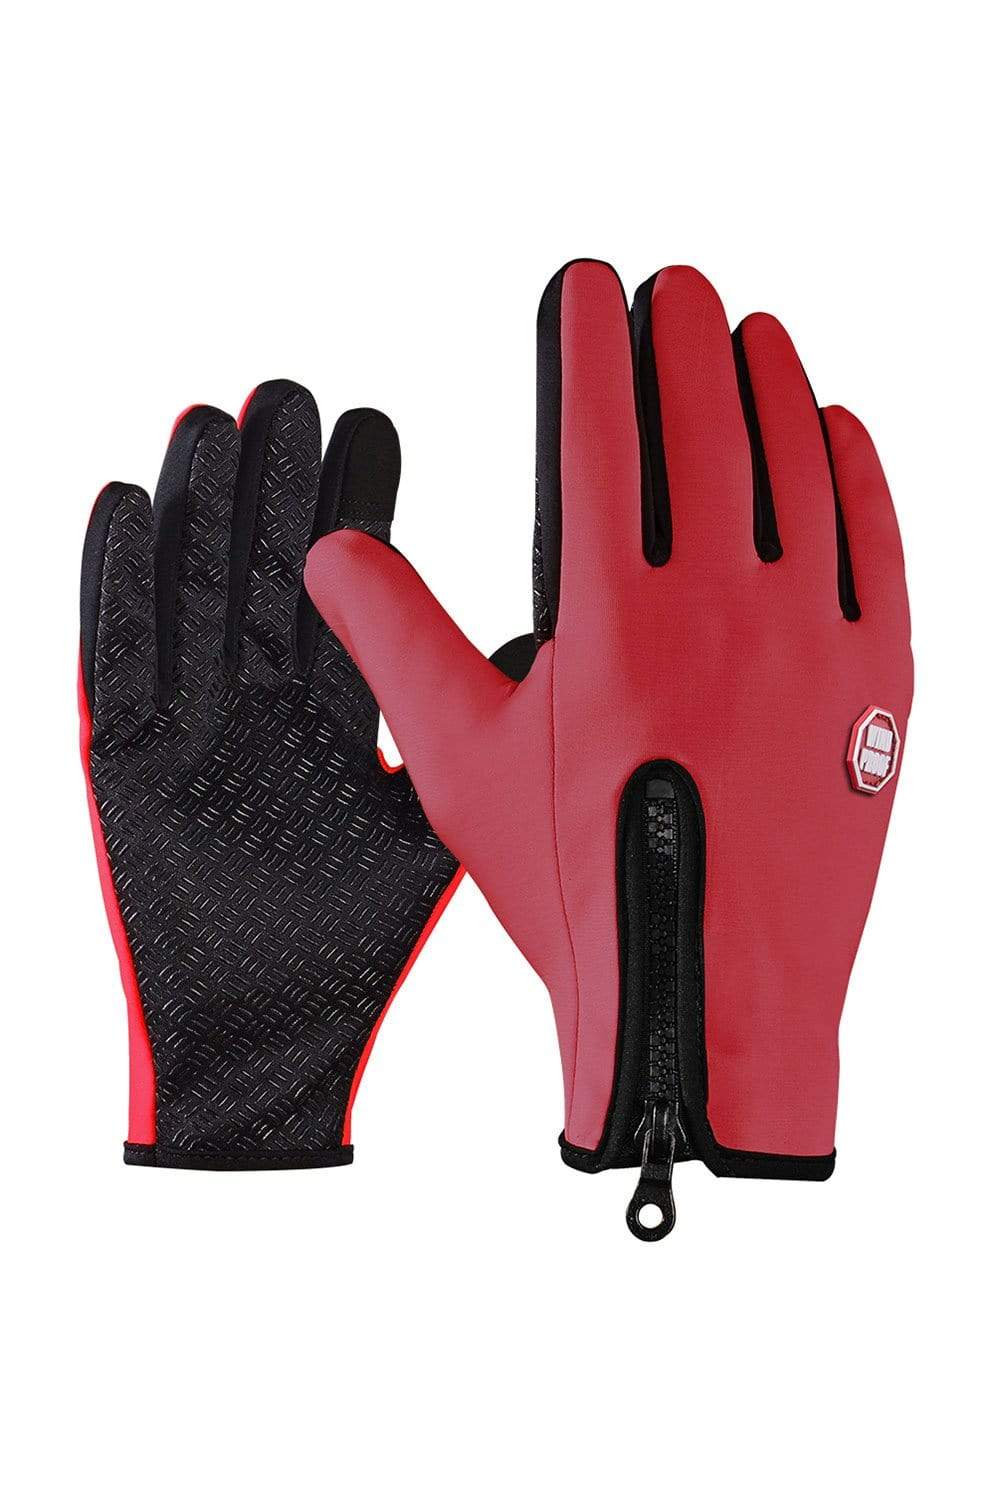 Warm Gloves Touch Screen Gloves Windproof Gloves for Hiking, Running, Cycling Gloves Red / Medium MIER